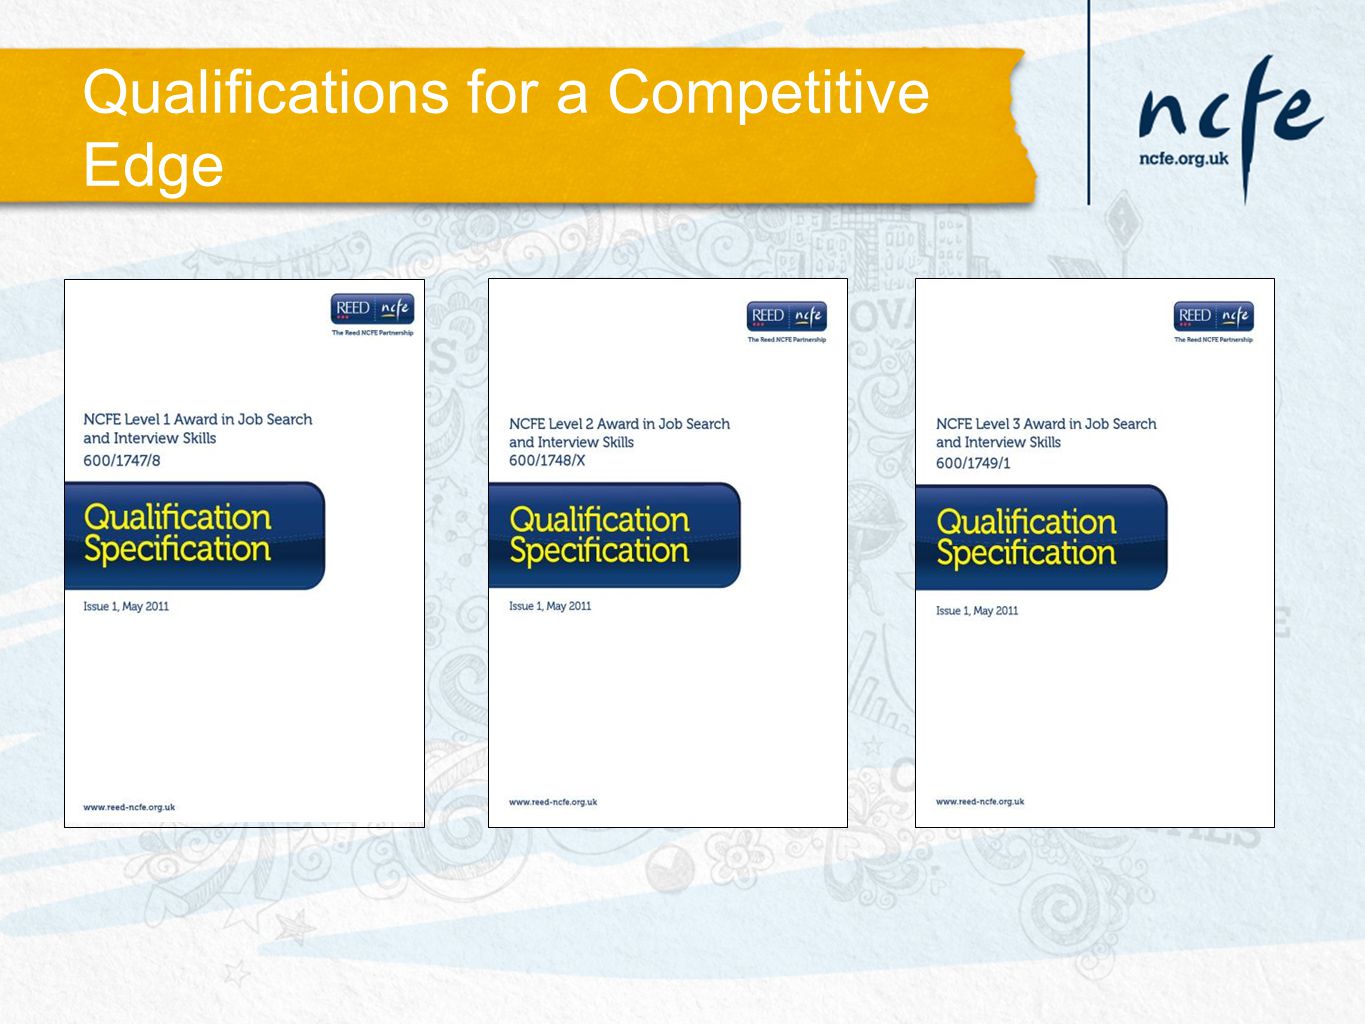 Qualifications for a Competitive Edge